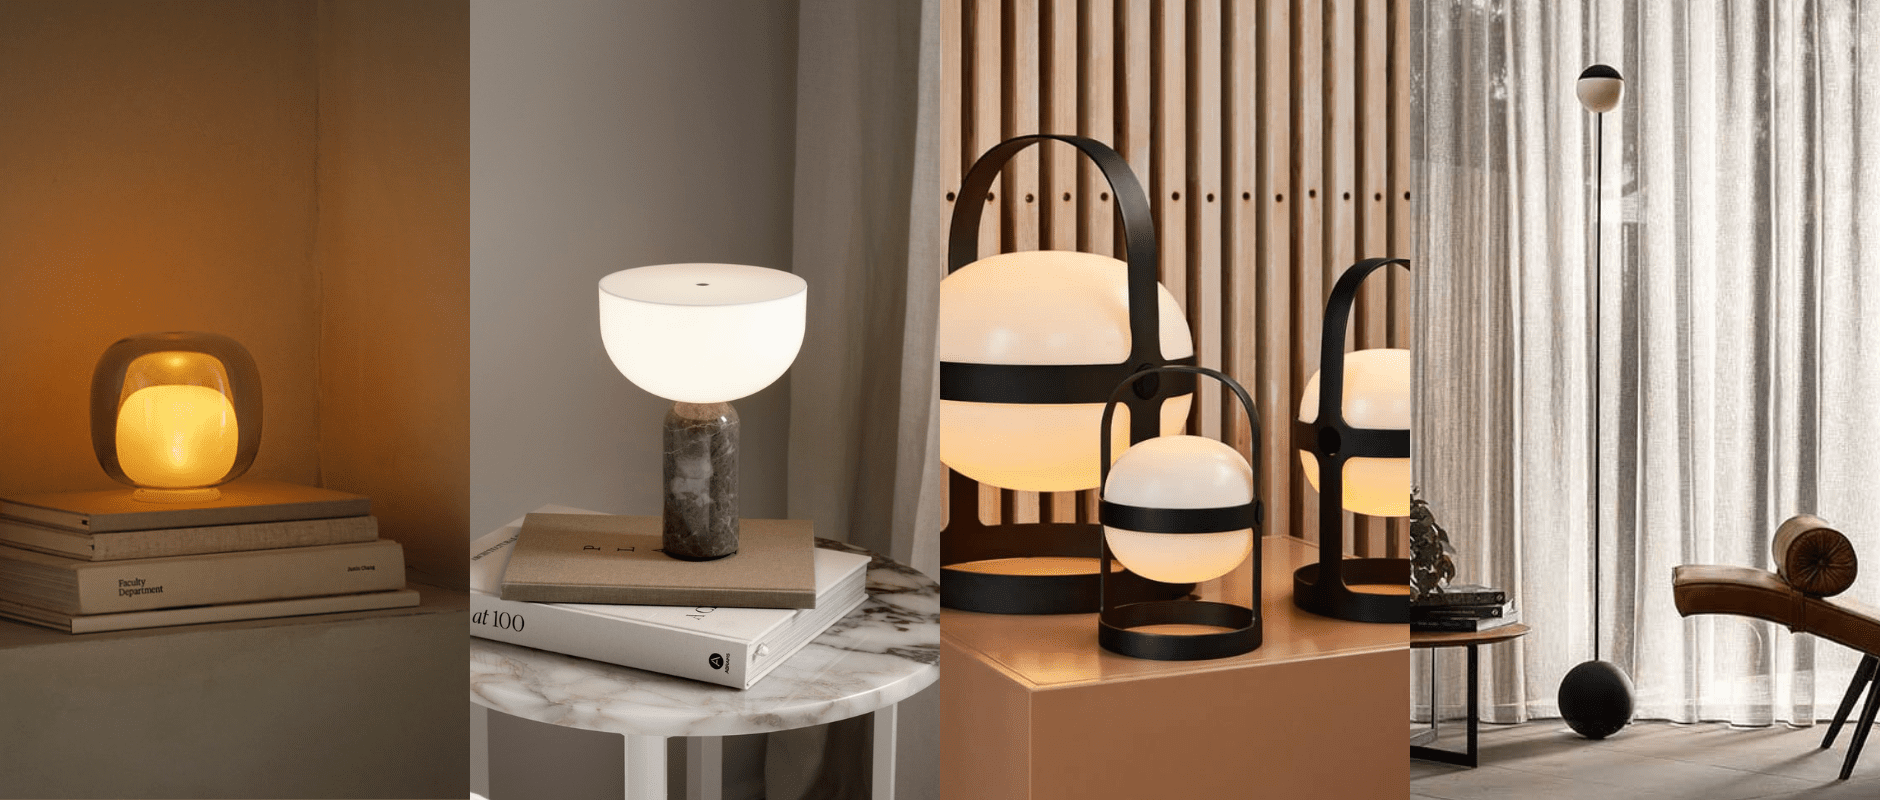 A collage of Designstuff's Portable Lamps featuring the Eva Solo Tea Light, The New Works Kizu Lamp, The Rosendahl Soft Spot Solar Lamp, and the Made By Pen Sway Floor Lamp.